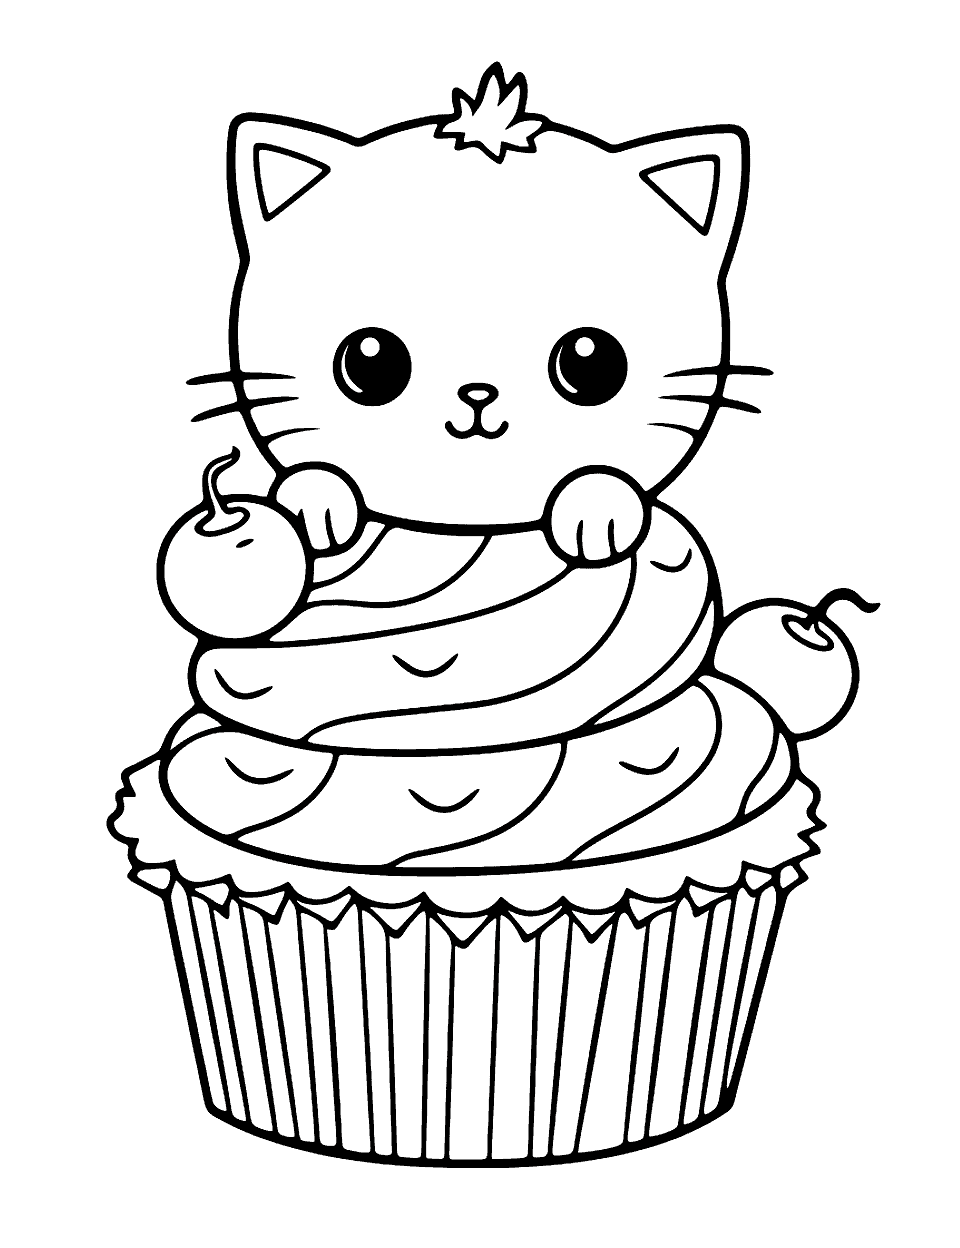 Cute Kitten with Cupcakes Cupcake Coloring Page - A small kitten sitting on top of a colorful cupcake.